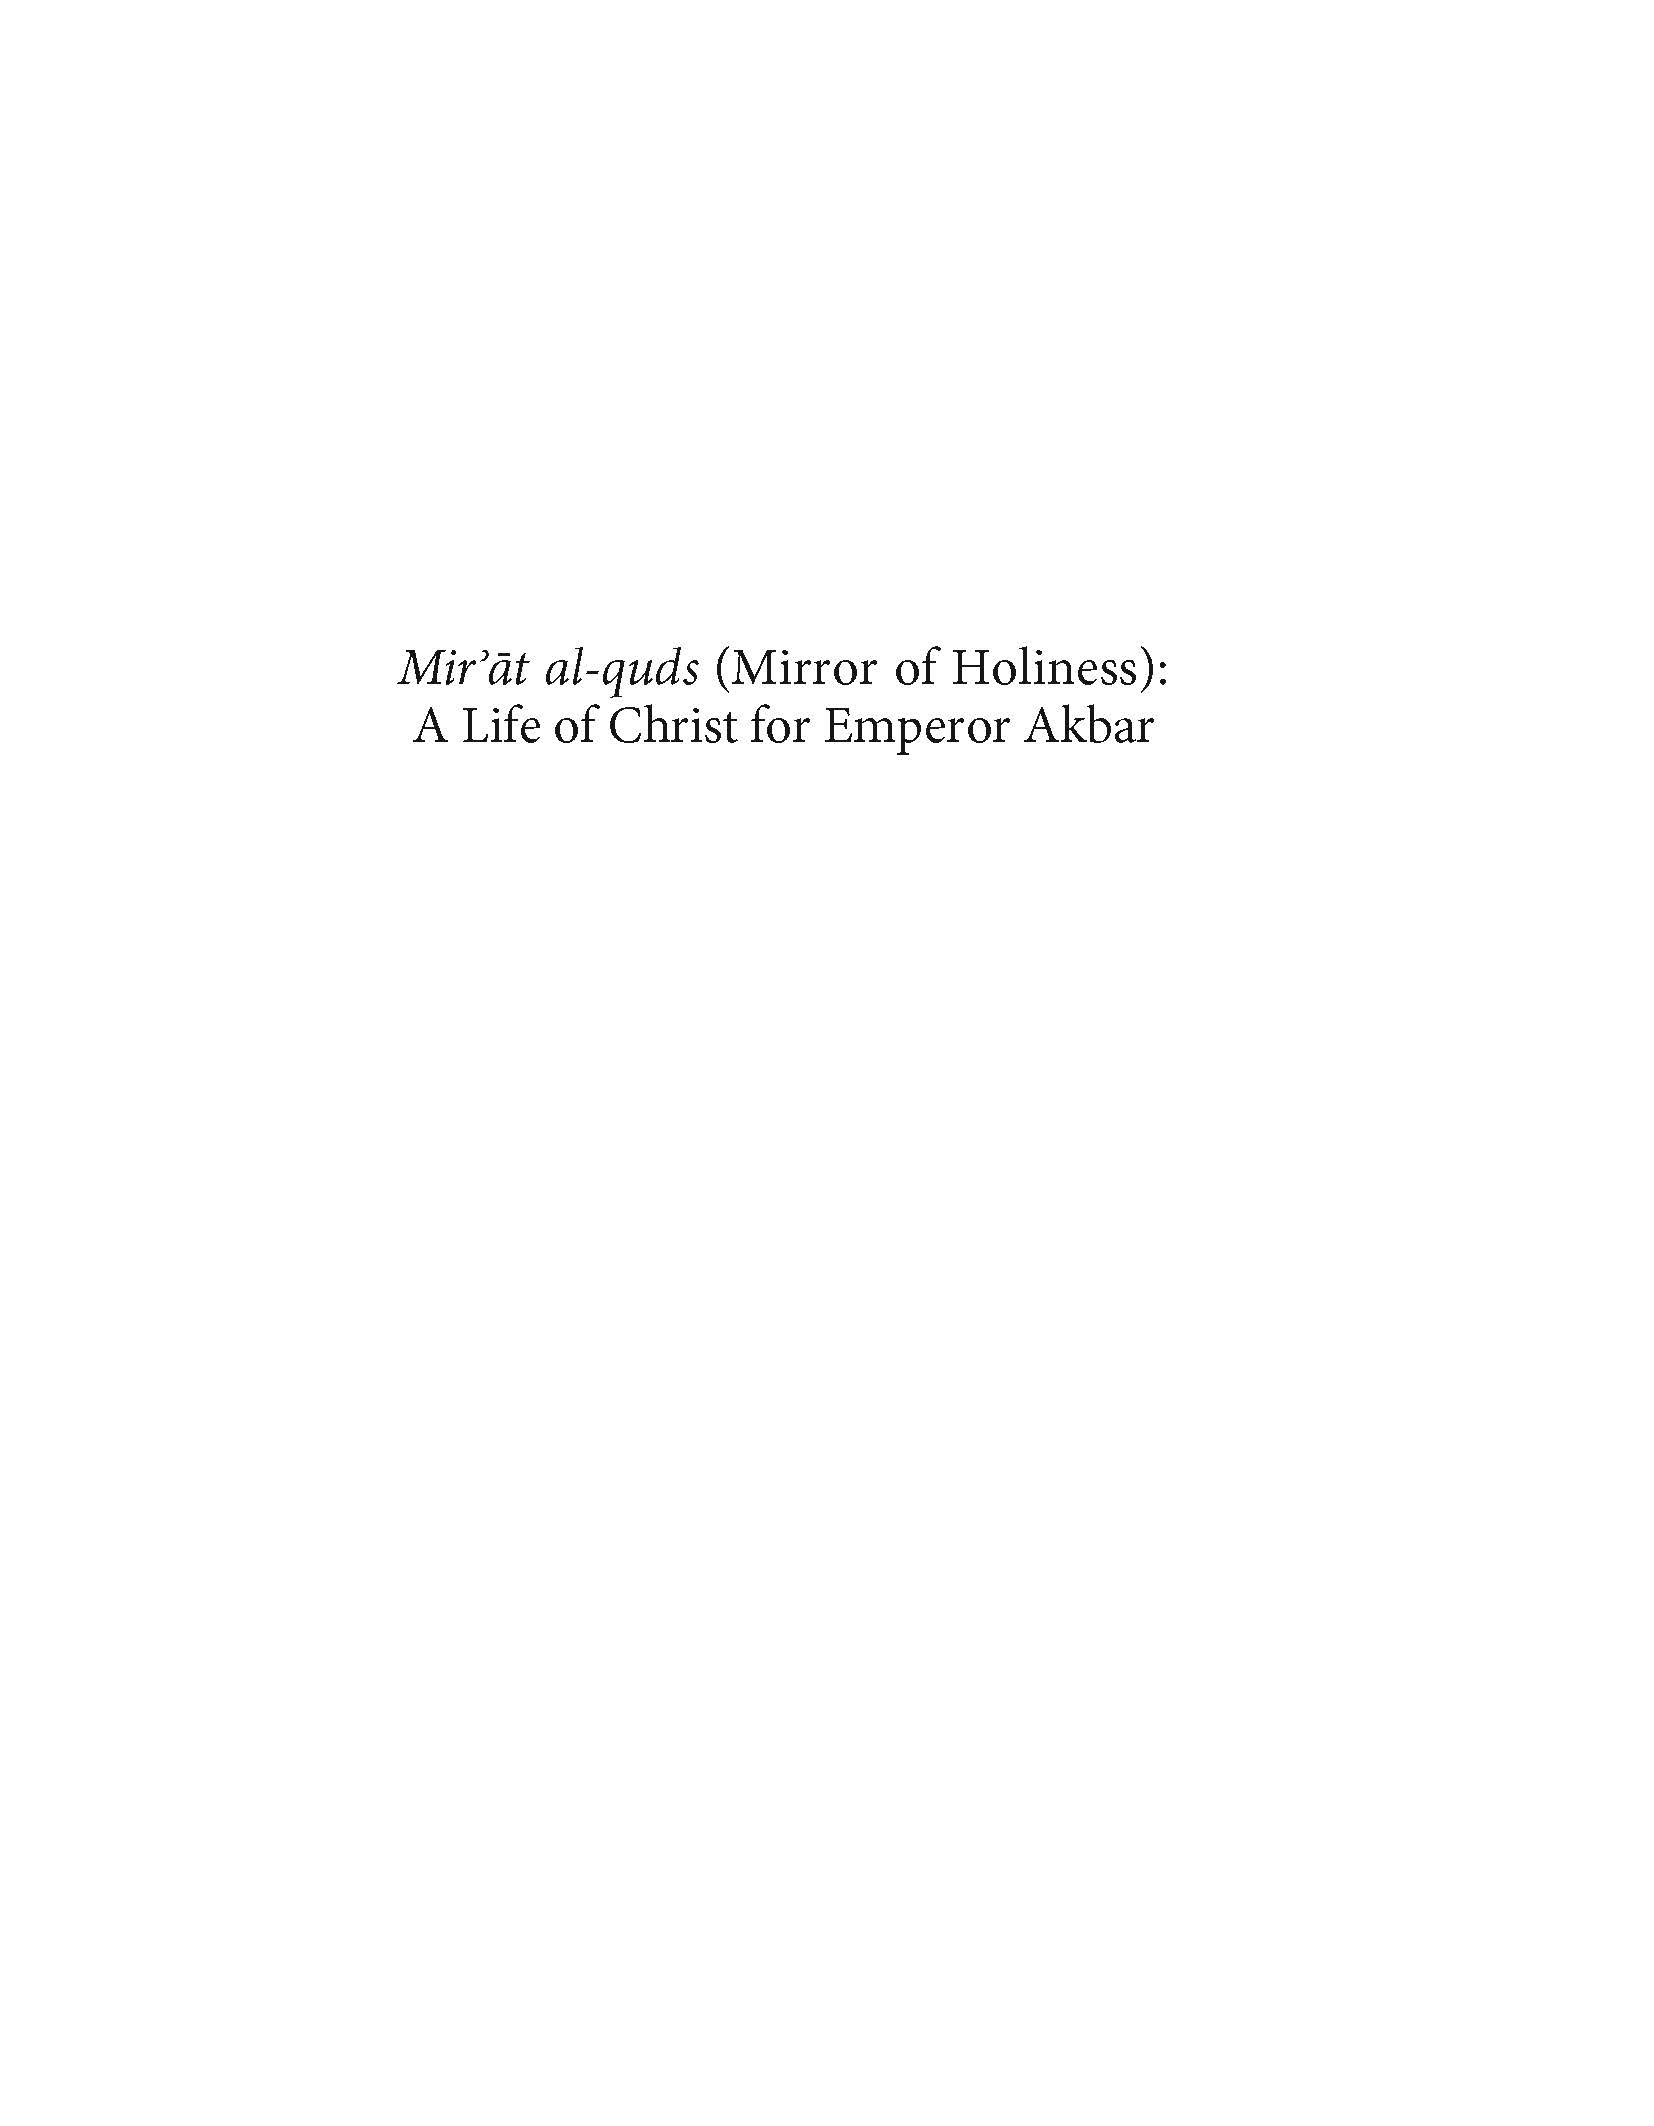 Title Page. Mir’at al-quds (Mirror of Holiness): A Life of Christ for Emperor Akbar (Studies and Sources in Islamic Art and Architecture - Supplements to Muqarnas Volume XII) 